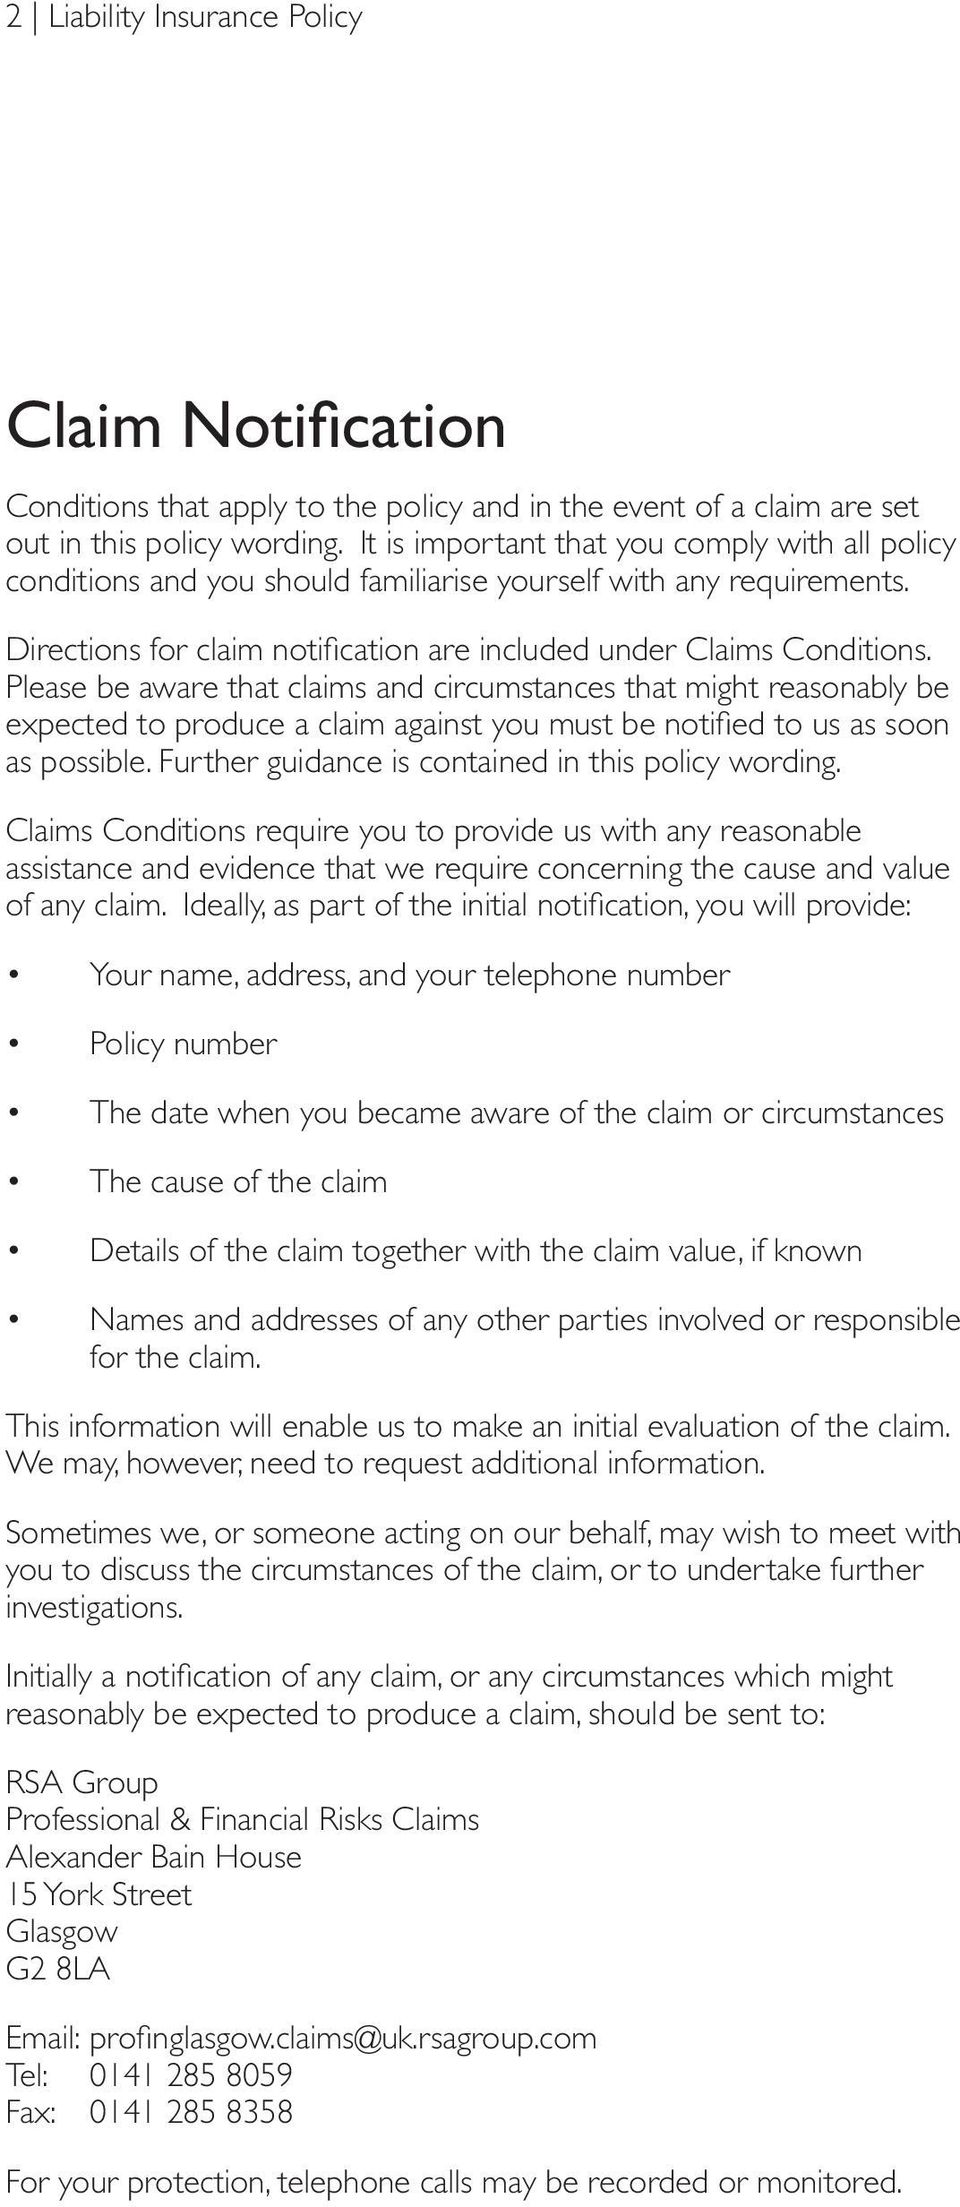 Please be aware that claims and circumstances that might reasonably be expected to produce a claim against you must be notified to us as soon as possible.